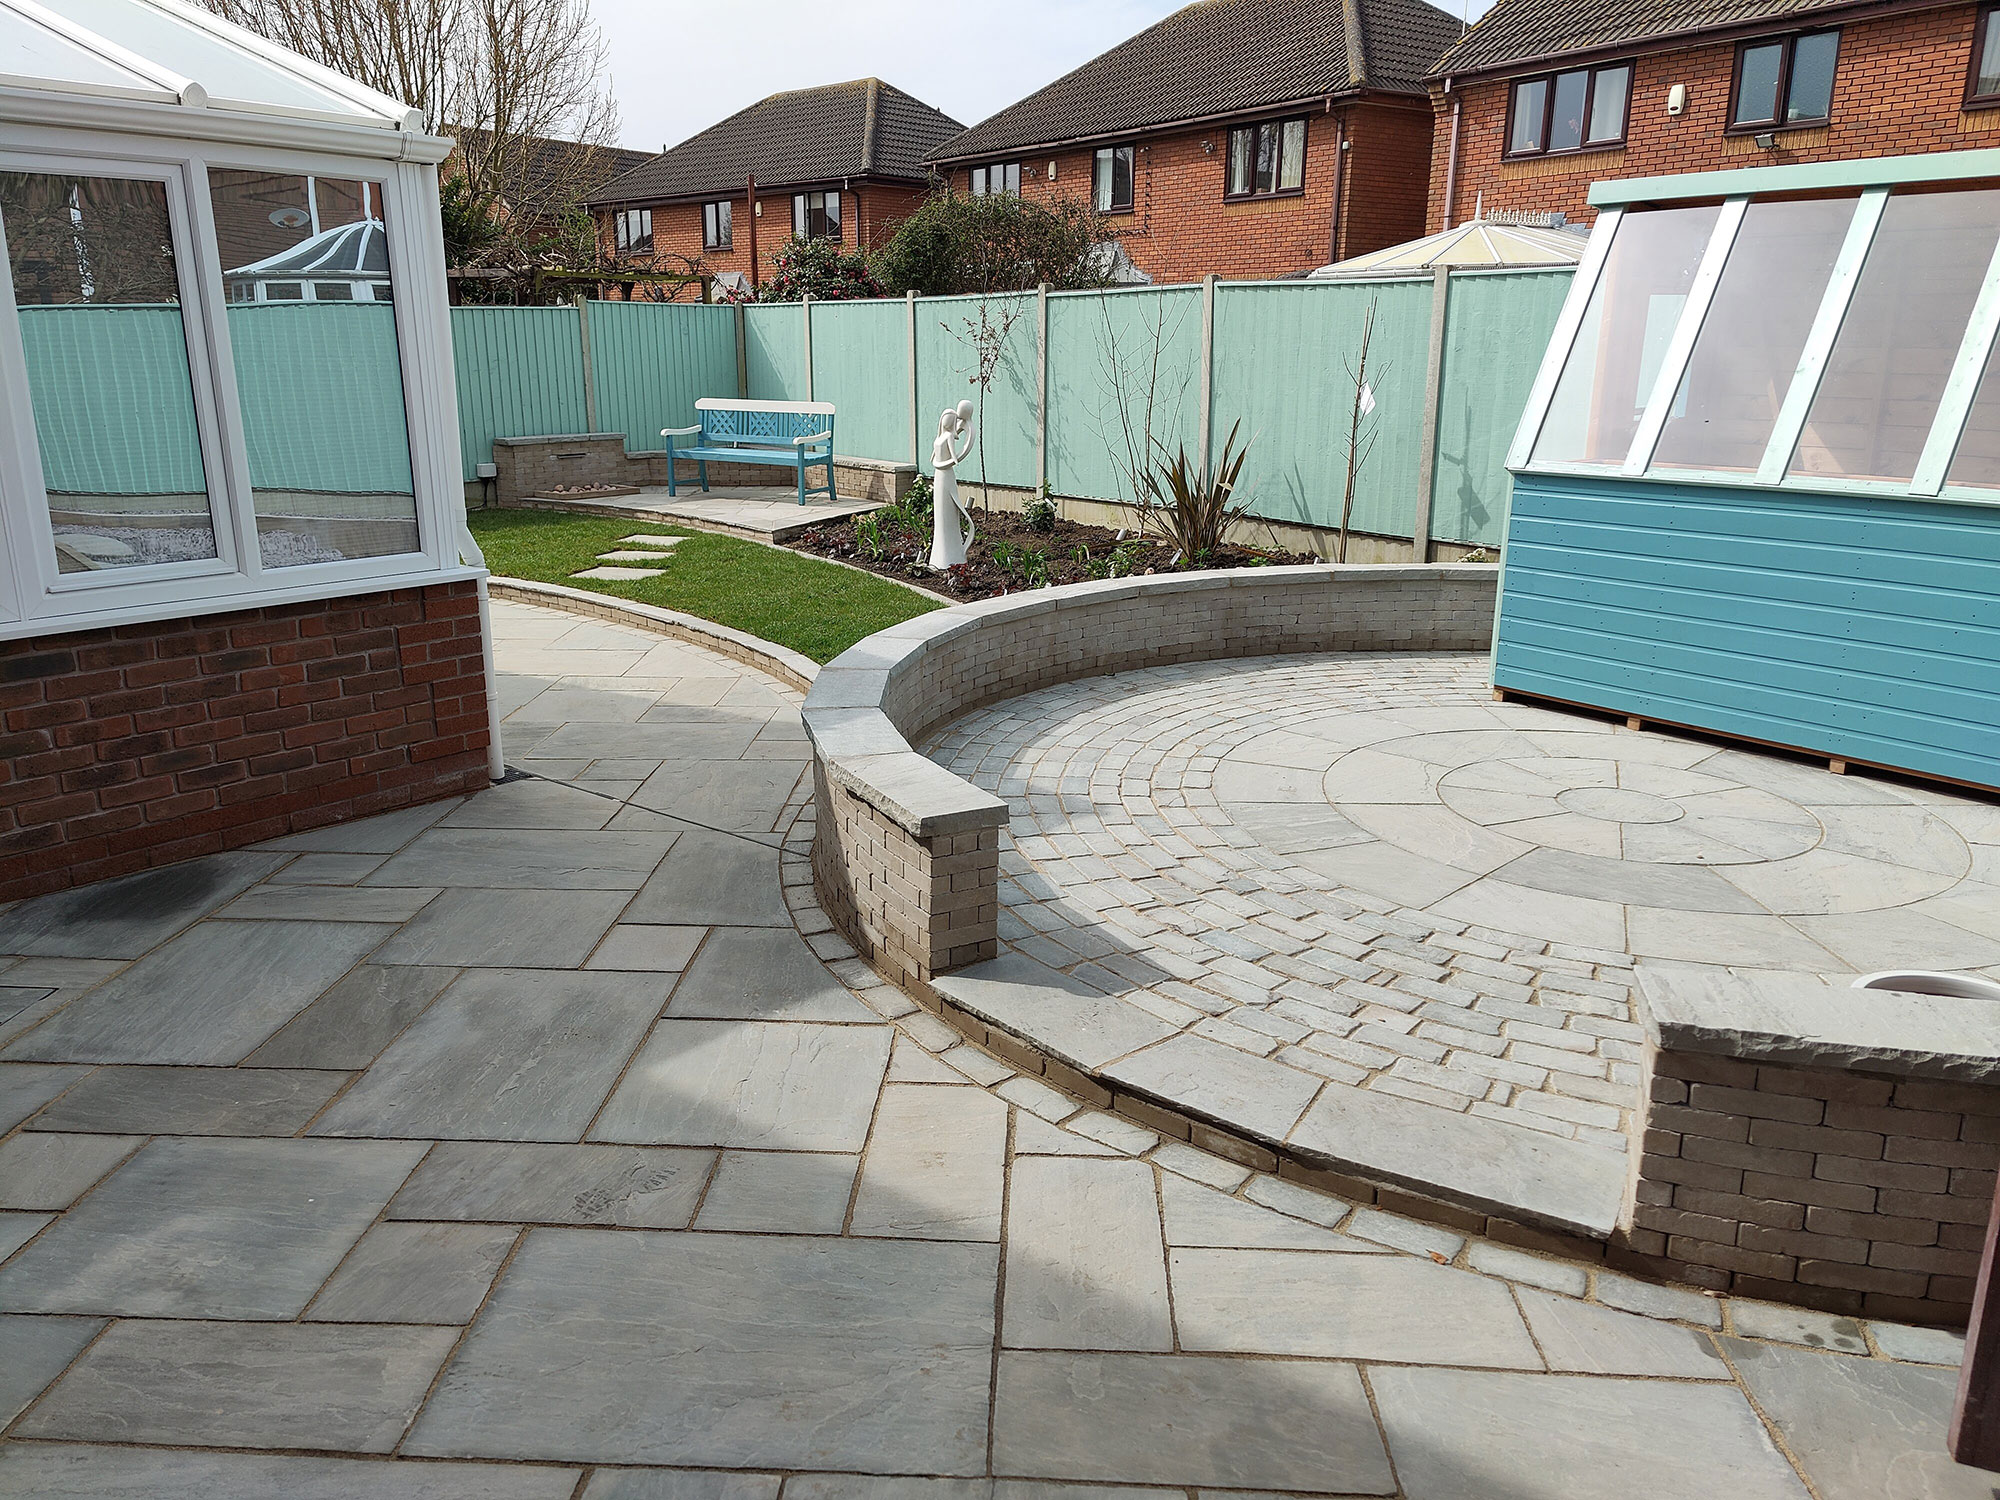 gorgeous garden with curved patios, lawns and flower beds